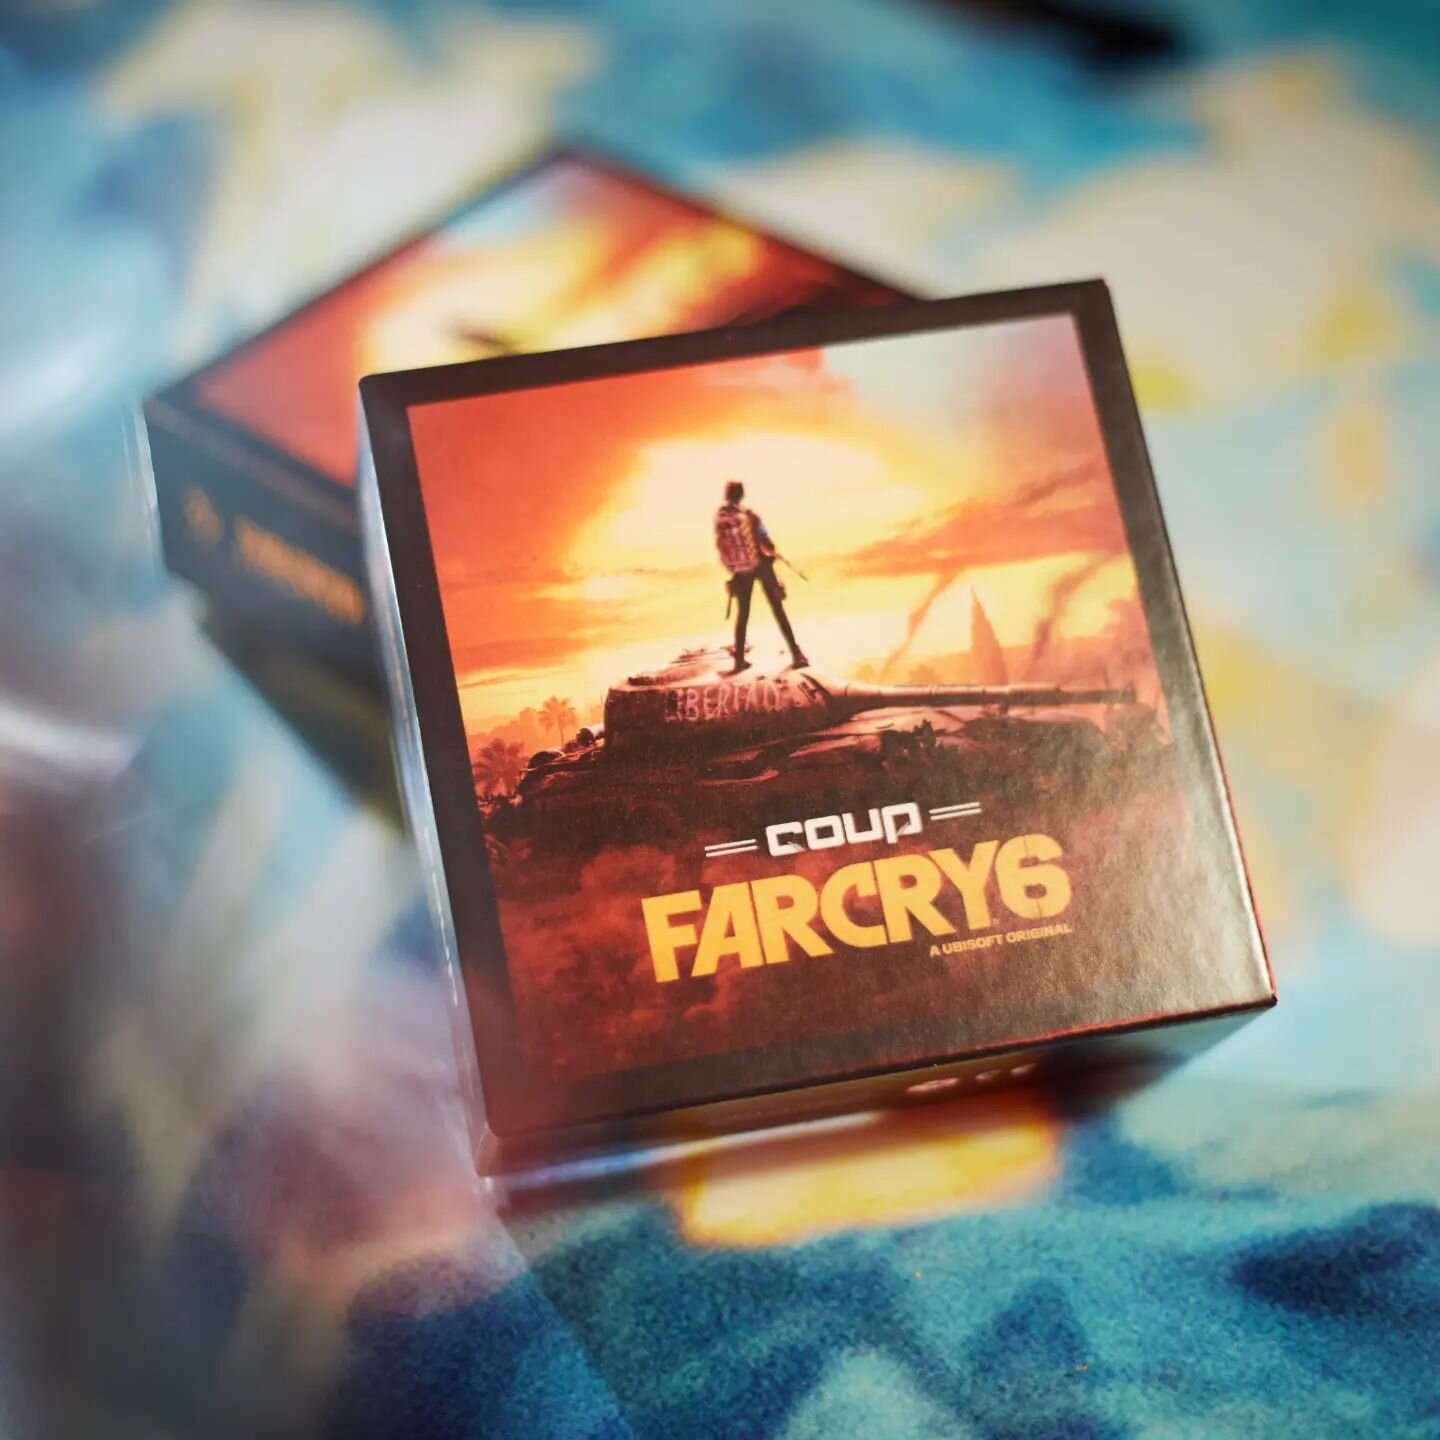 Far Cry 6 just dropped its Lost Between Worlds DLC, so here's a throwback to the Far Cry x Coup card game (limited edition) that we developed to promote Far Cry 6's launch in Germany!

Did you know that playing a game of Coup with the team is the fin